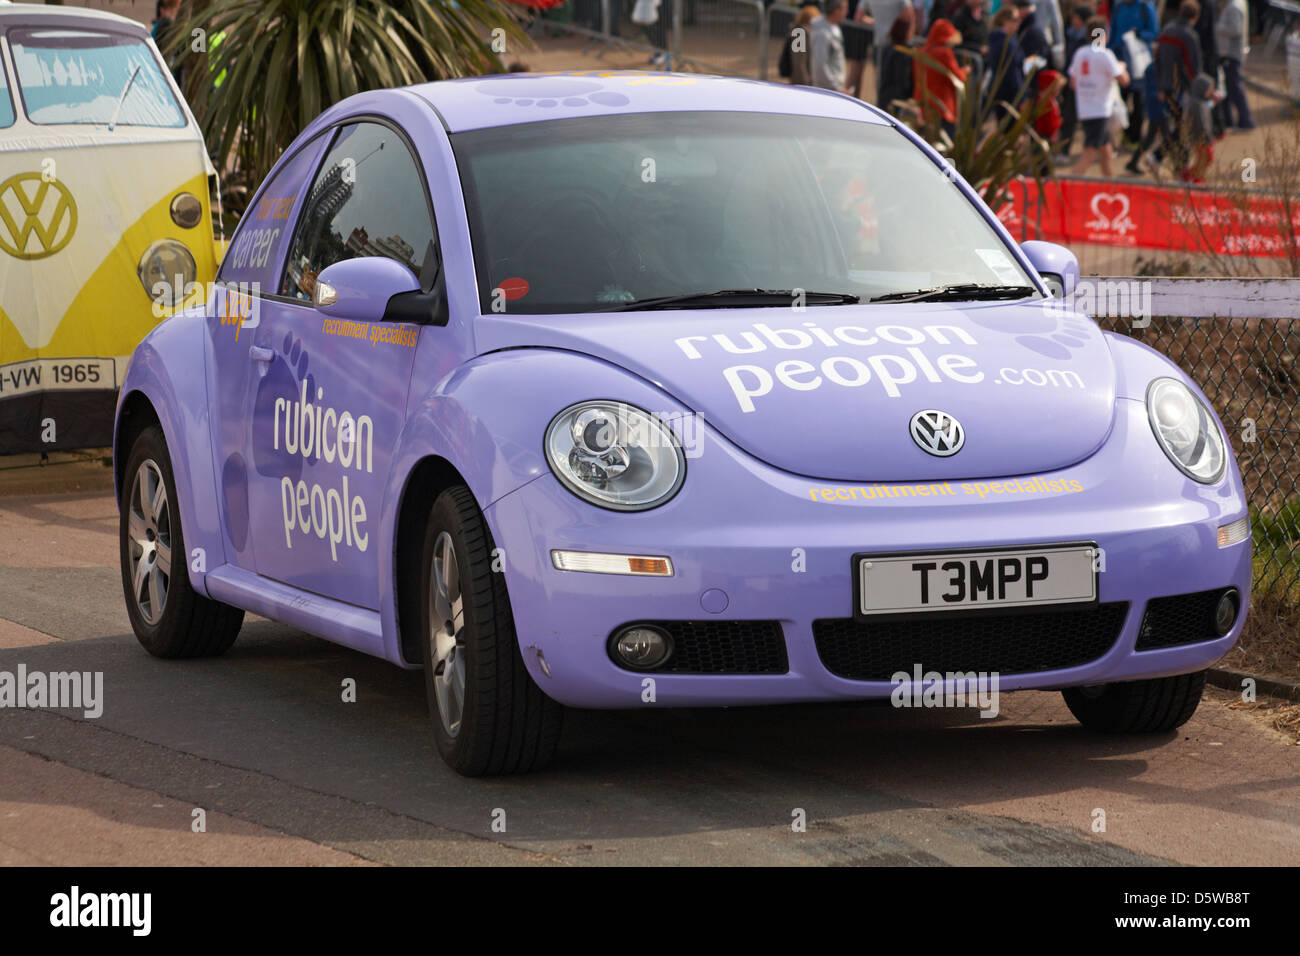 Personalised Volkswagen beetle car VW Beetle - rubicon people recruitment specialists at Bournemouth, Dorset UK in April Stock Photo